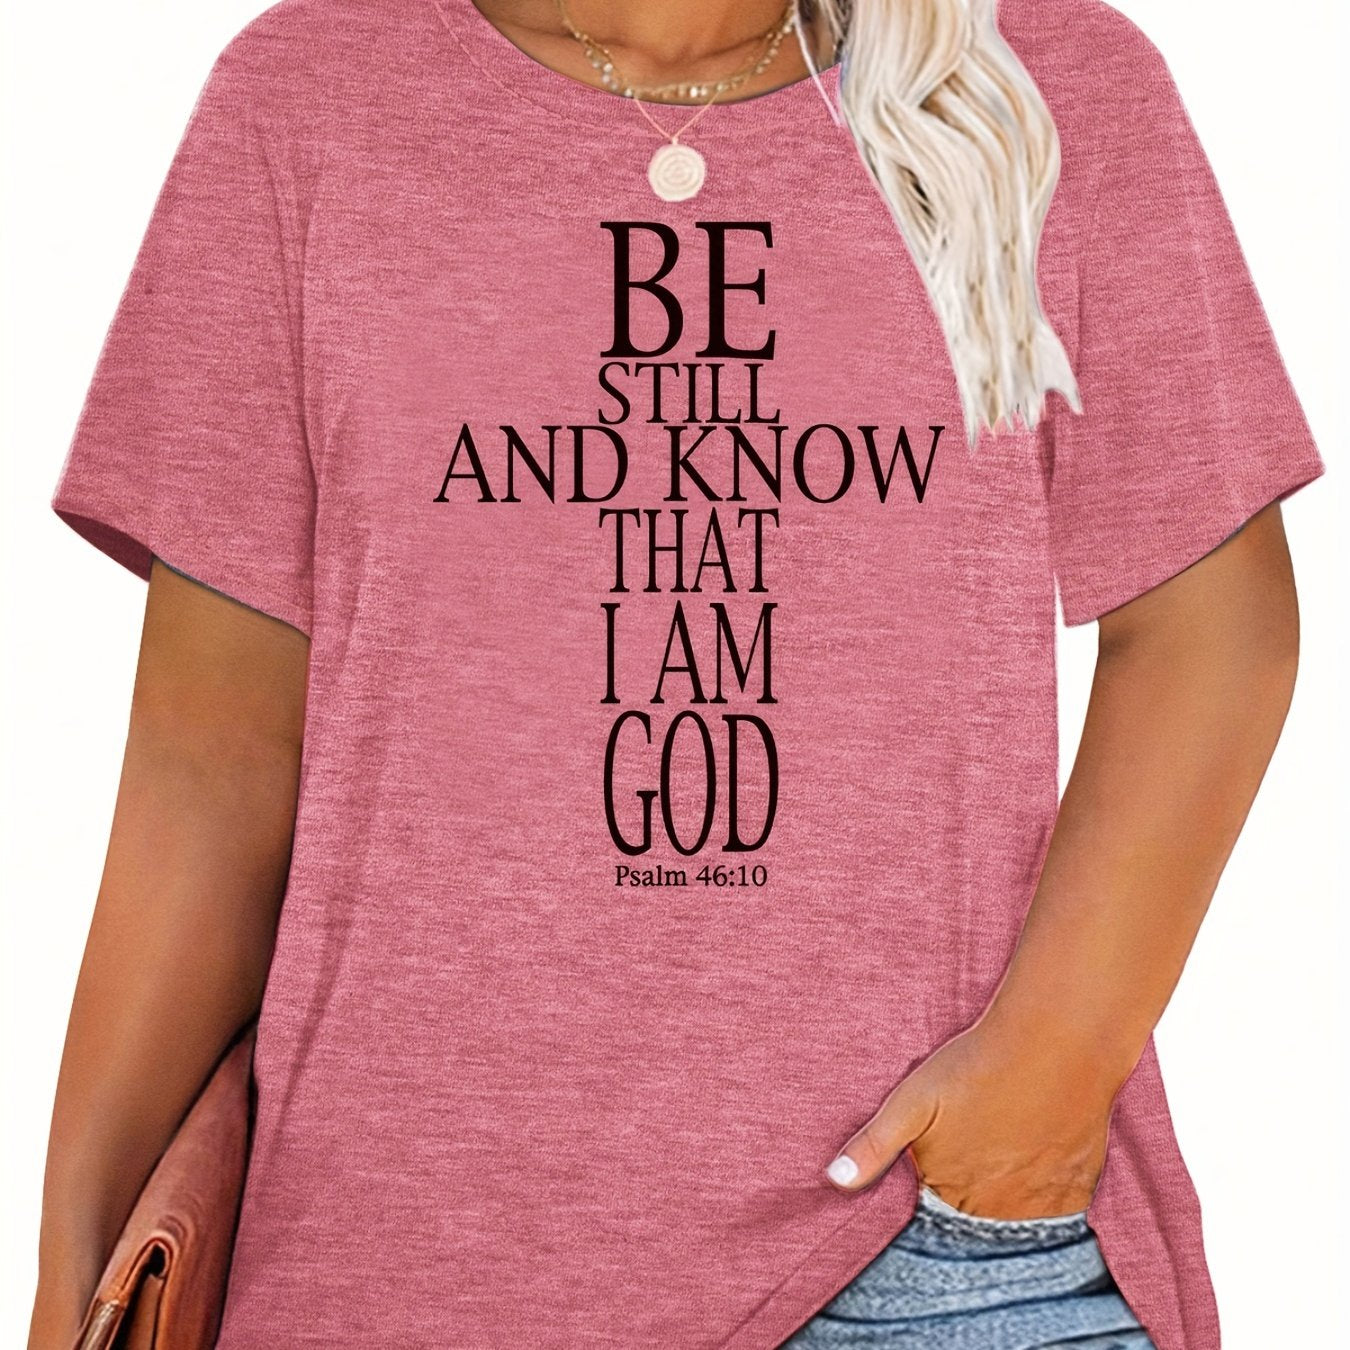 Be Still And Know That I Am God Plus Size Women's Christian T-shirt claimedbygoddesigns